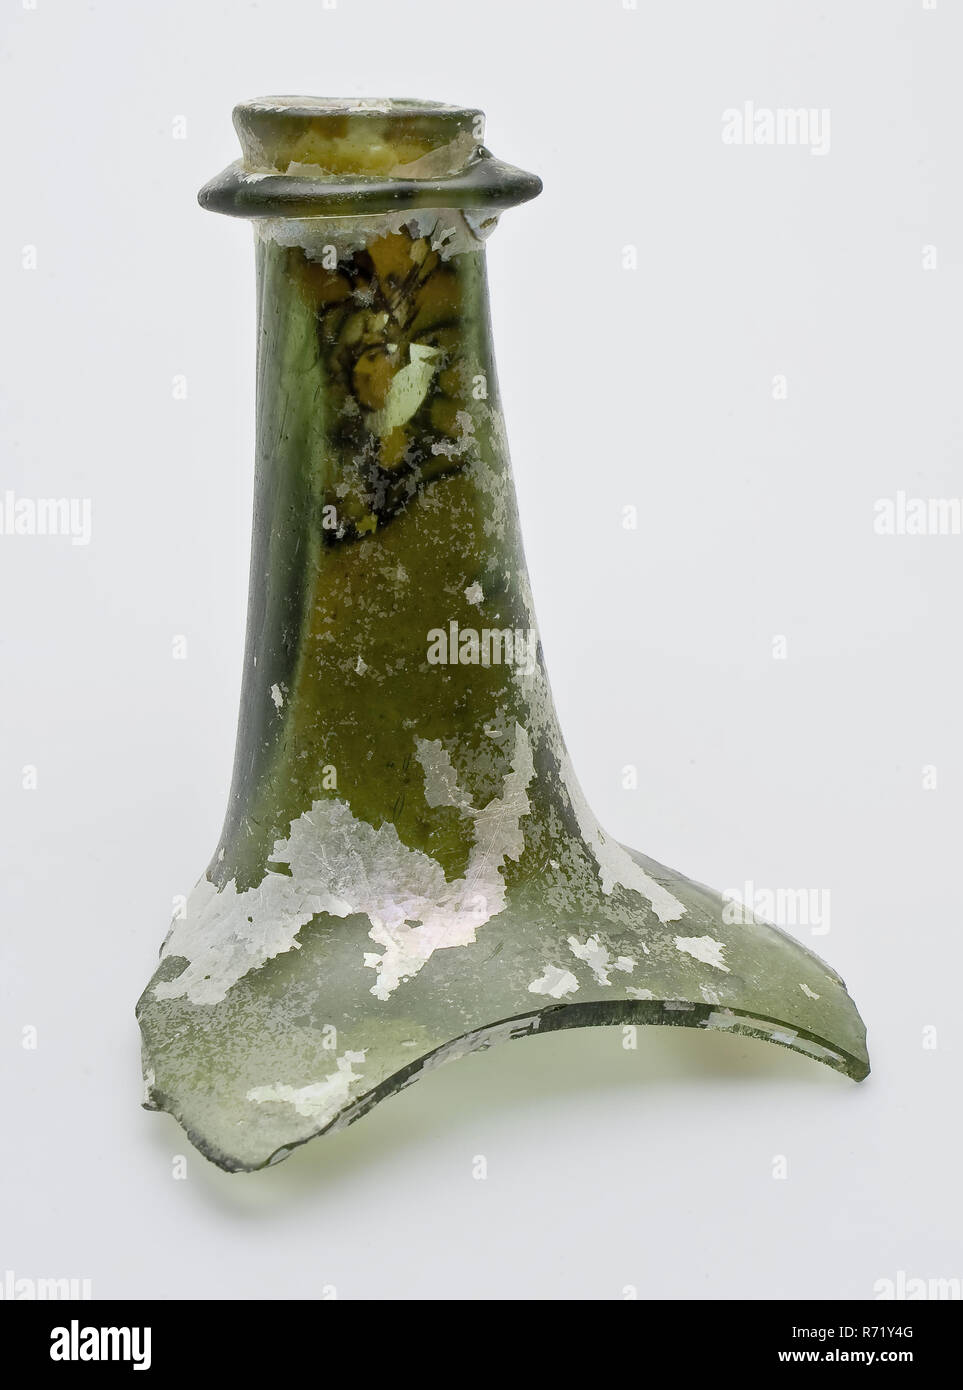 Fragment of part of shoulders, neck and mouth of stock bottle (wine bottle), bottle bottle wine bottle storage bottle bottle holder soil find glass, free blown and shaped glass application Fragment of part of shoulders of neck and mouth of stock bottle wine bottle (cat head) in clear green glass Round drooping shoulders short (6.5 cm) rejuvenated (3.6 - 1.9 cm) neck. At the neck at 0.5 cm from the mouth, there is an imposed circumferential sharp glass thread (binding edge) through which the neck is dented in two places. Tensile stress traces on the neck. Mouth slightly dilated (2.3 cm) and fla Stock Photo